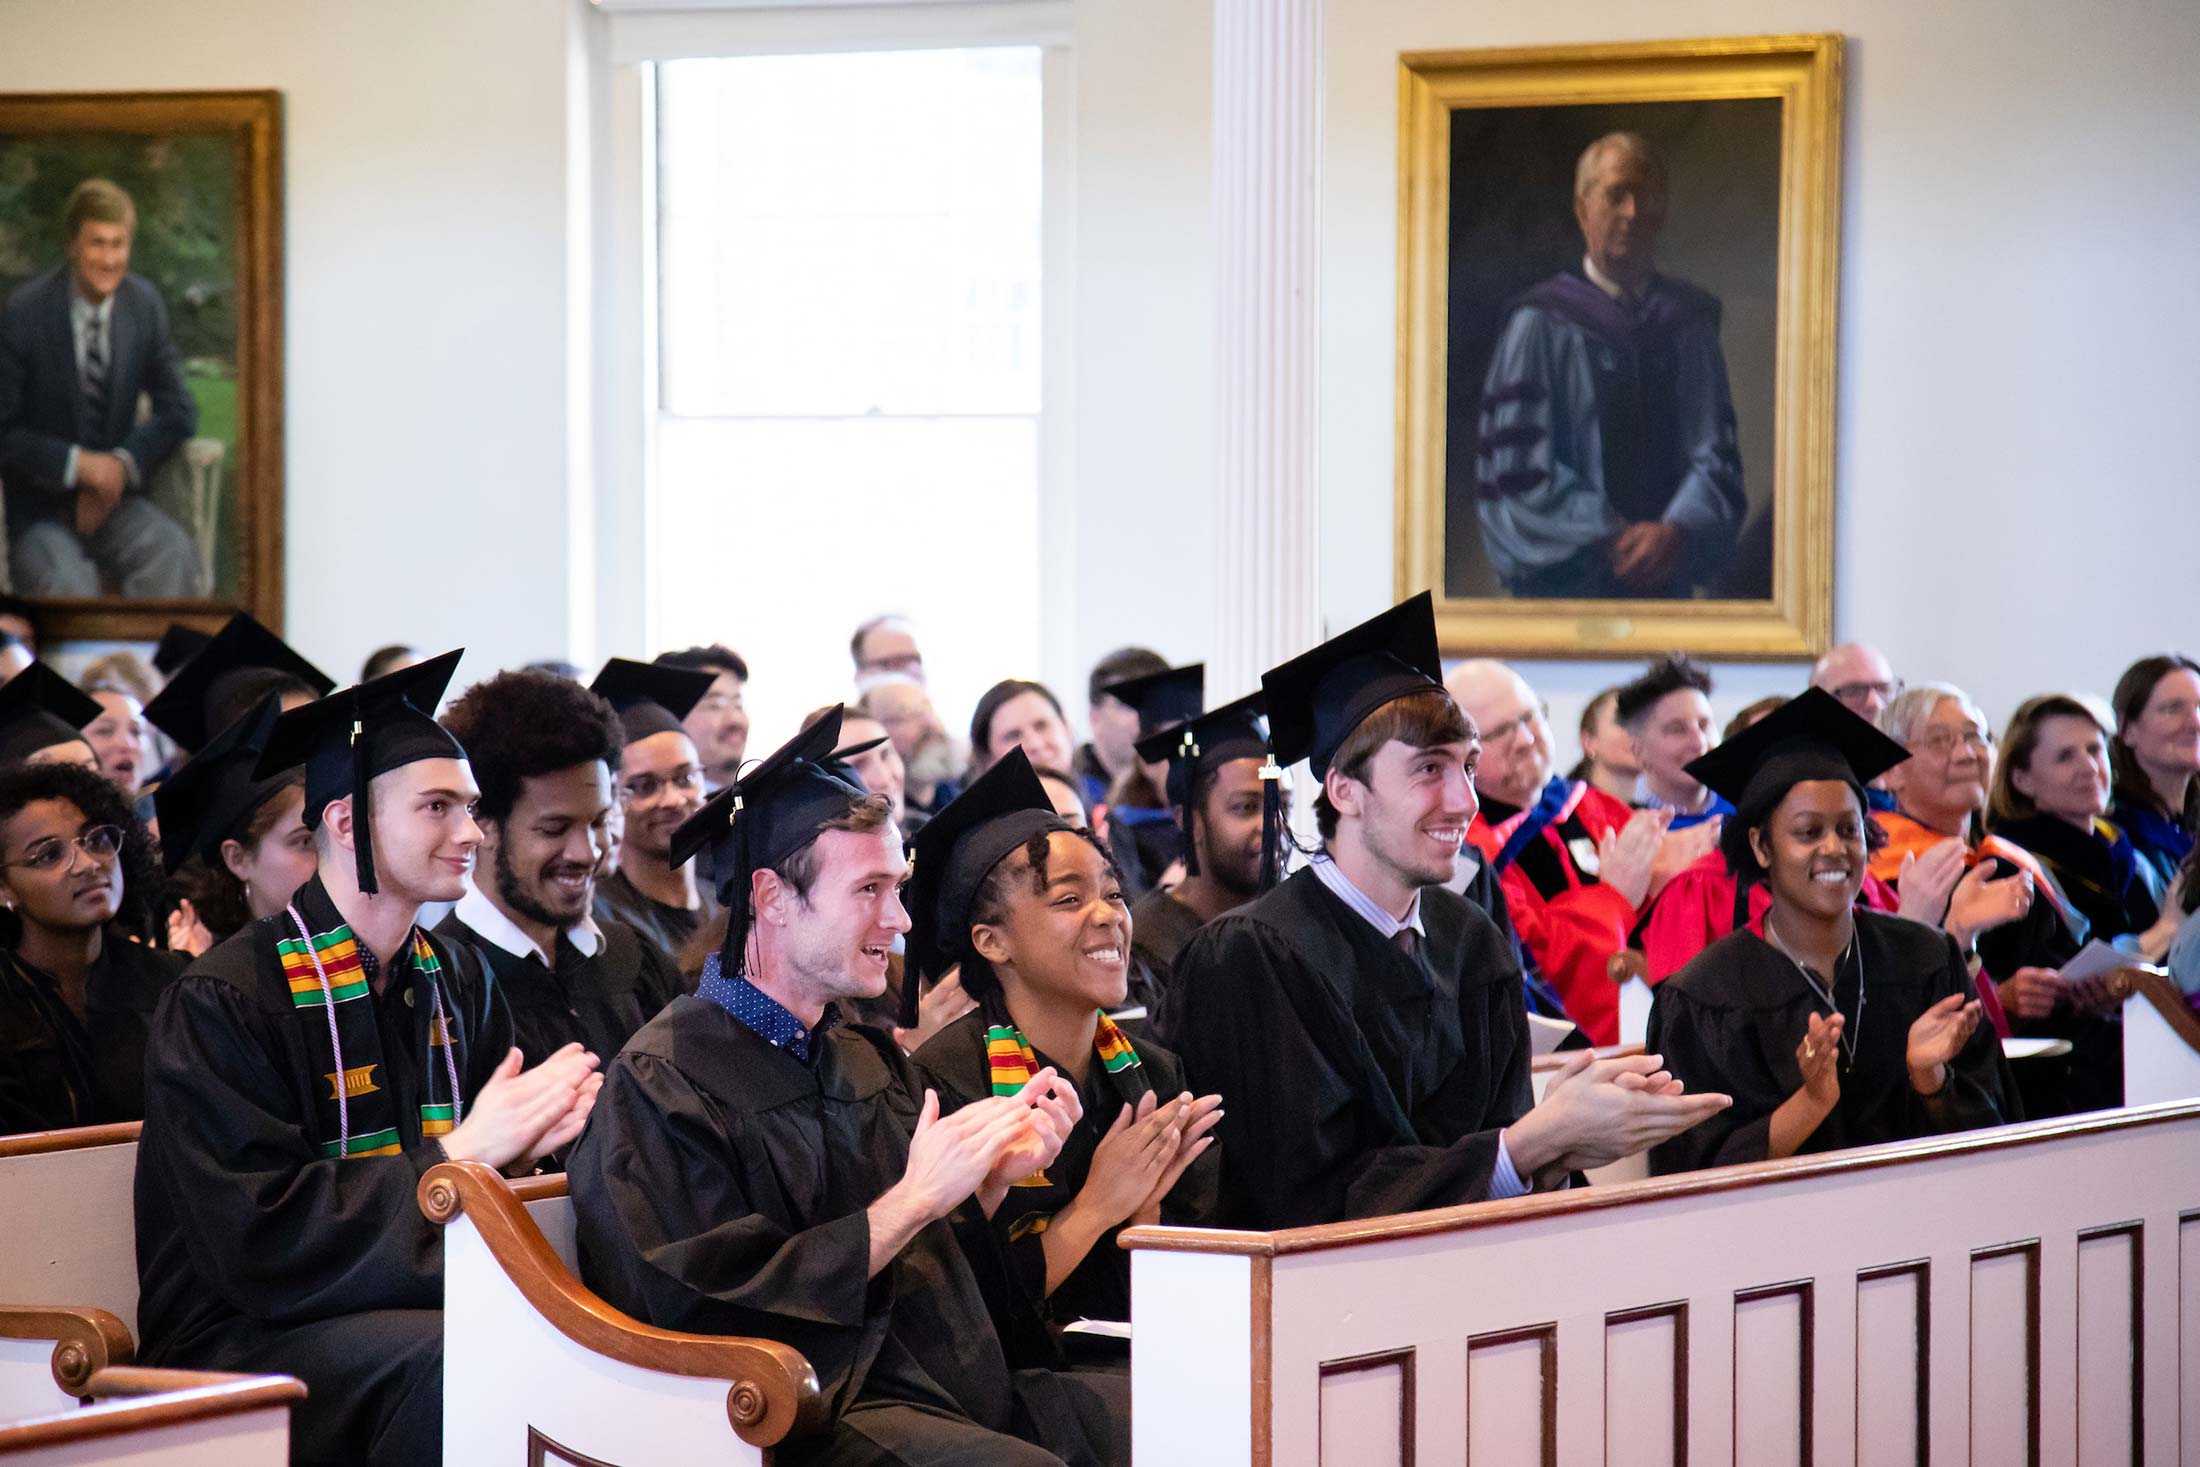 Students listening to speeches during Senior Awards Assembly in Johnson Chapel at Amherst College